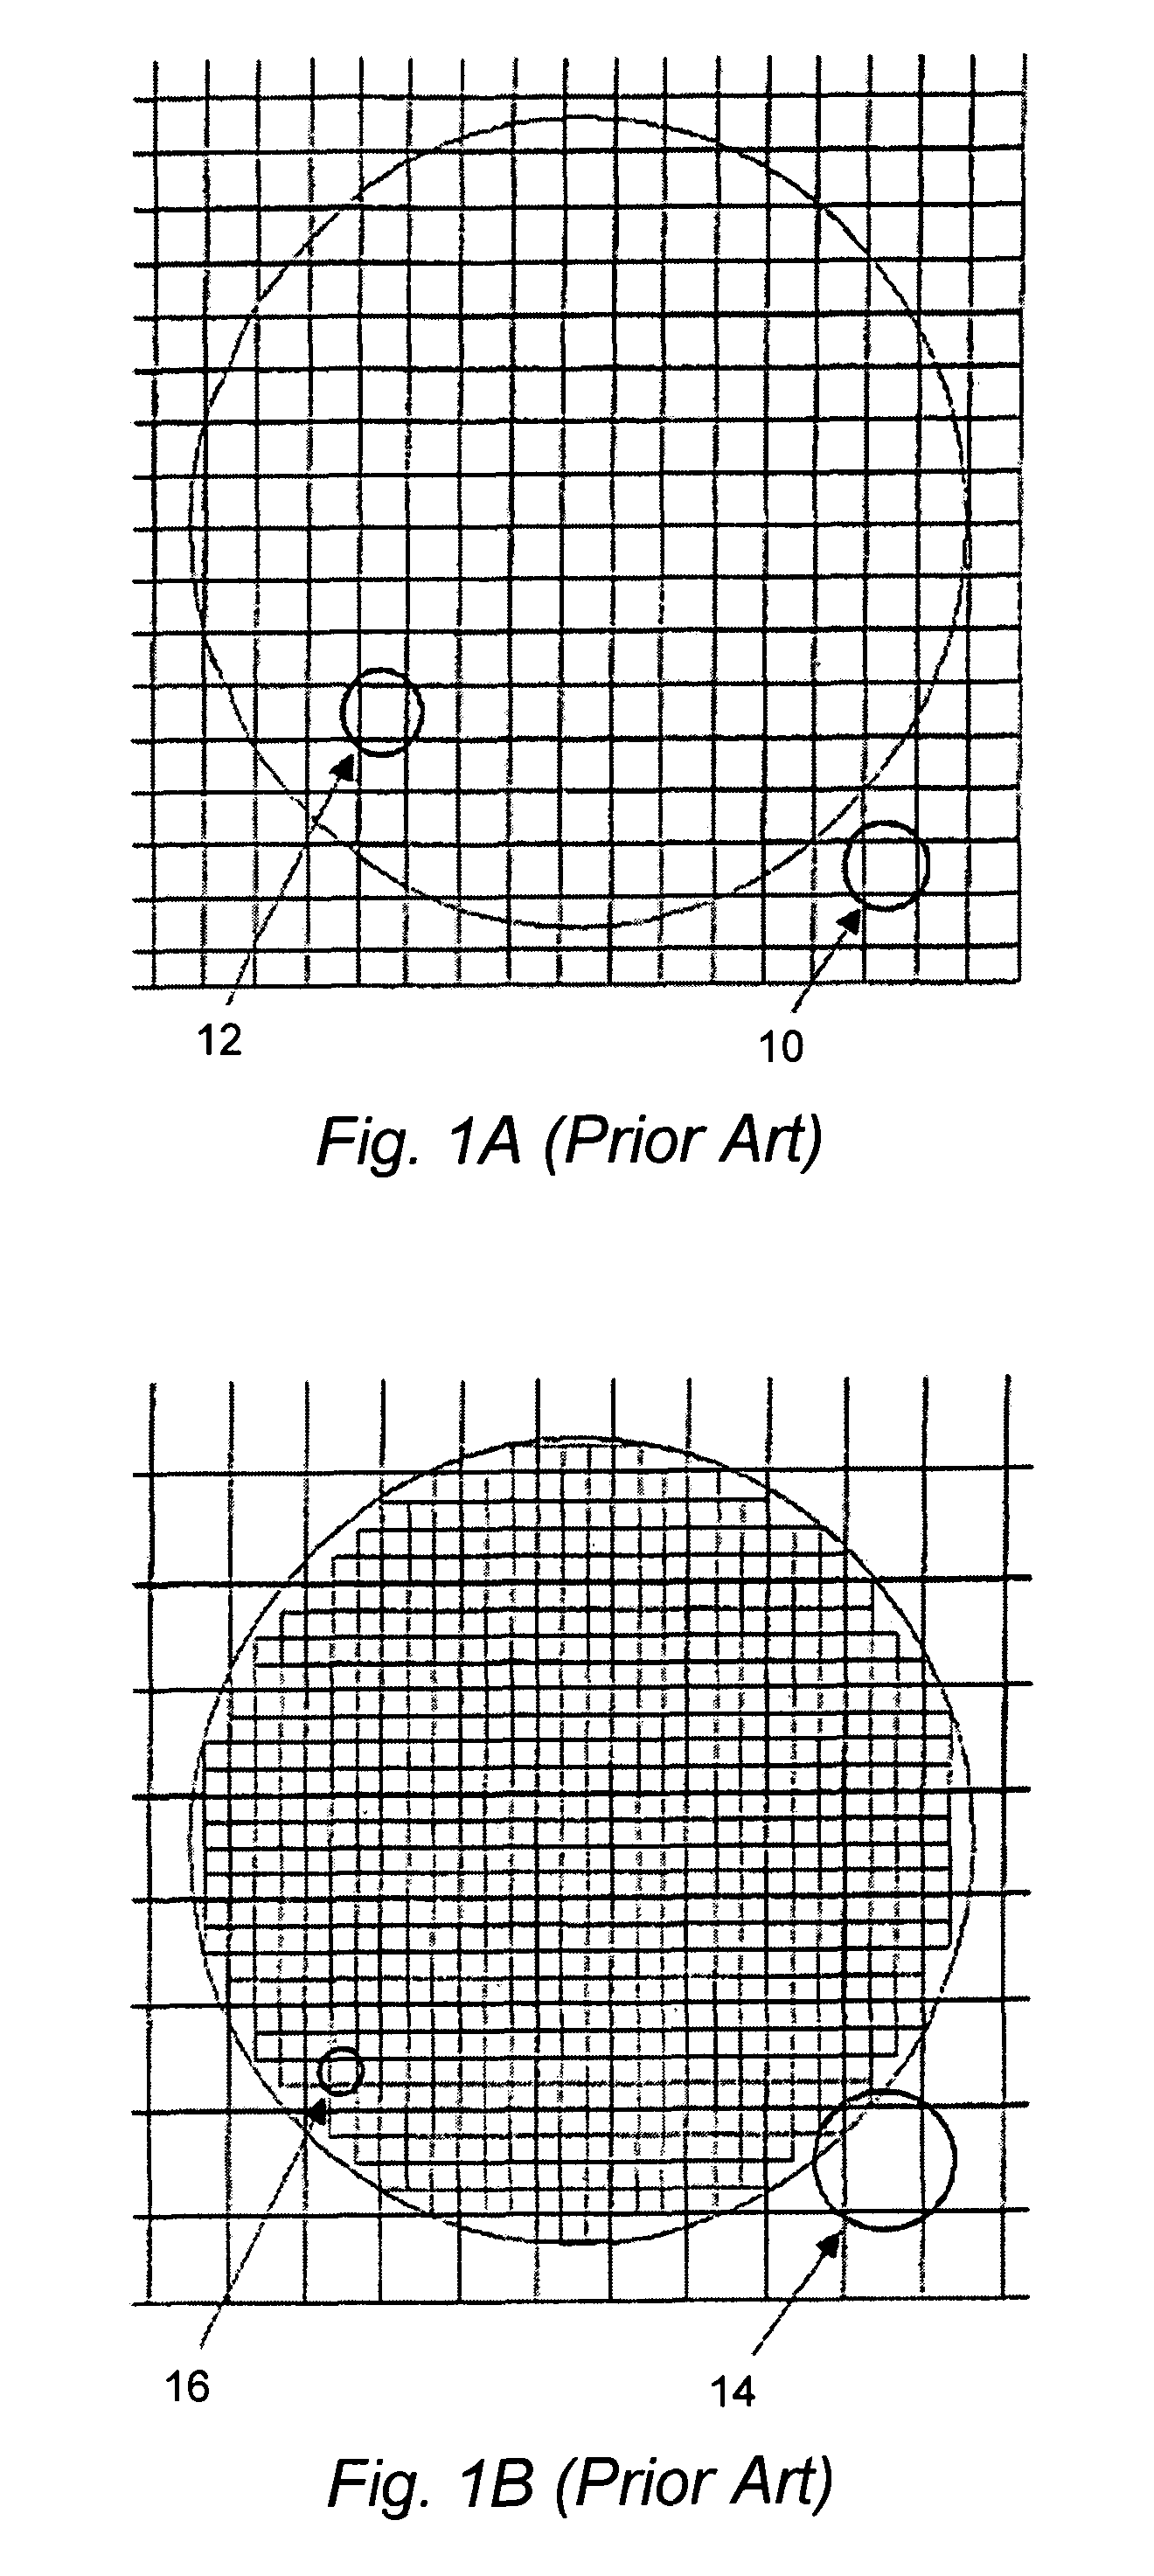 Qualifying patterns, patterning processes, or patterning apparatus in the fabrication of microlithographic patterns